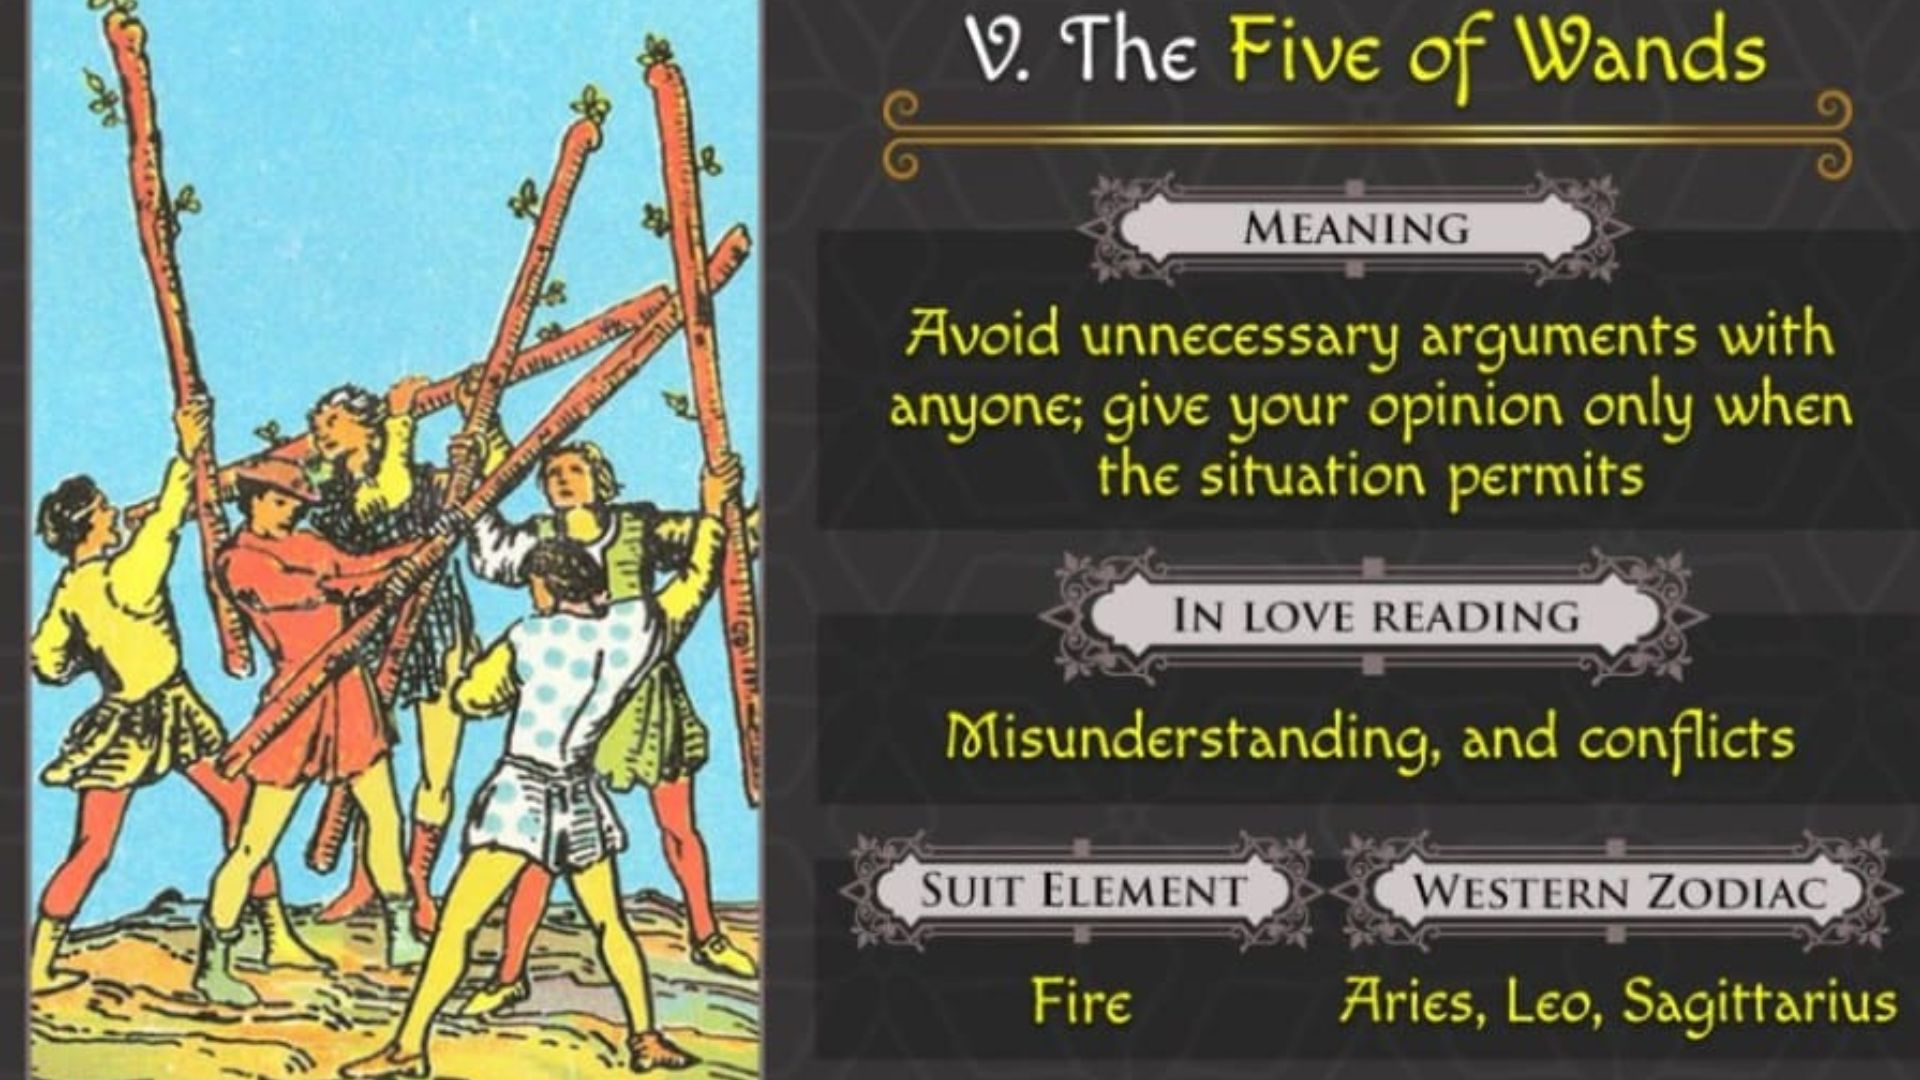 5 Of Wands Card With Its Description